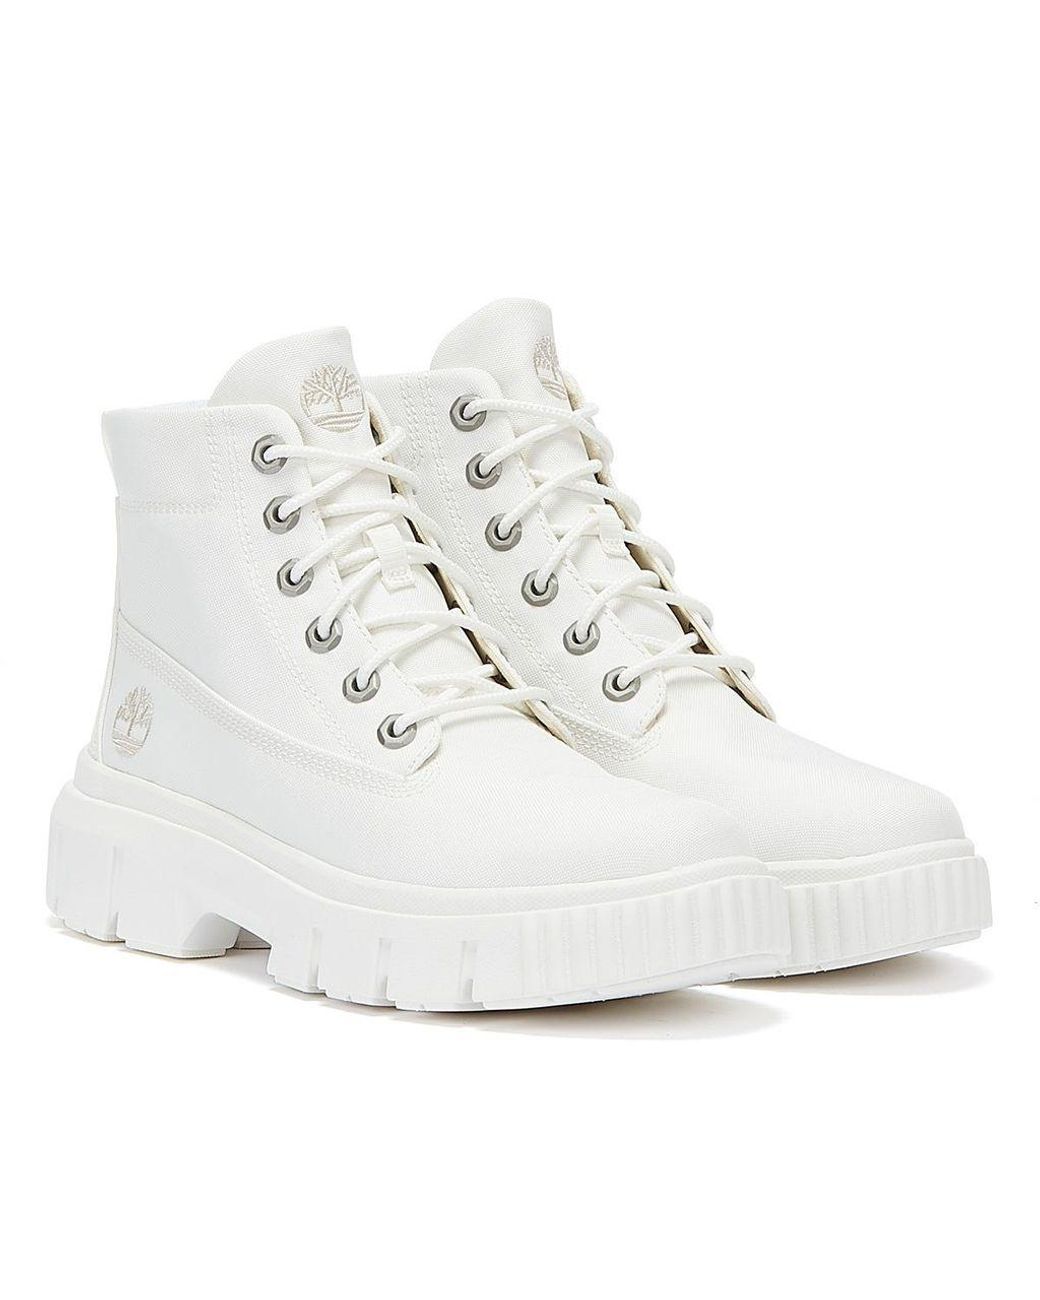 Timberland Greyfield Fabric Boots in White | Lyst Australia